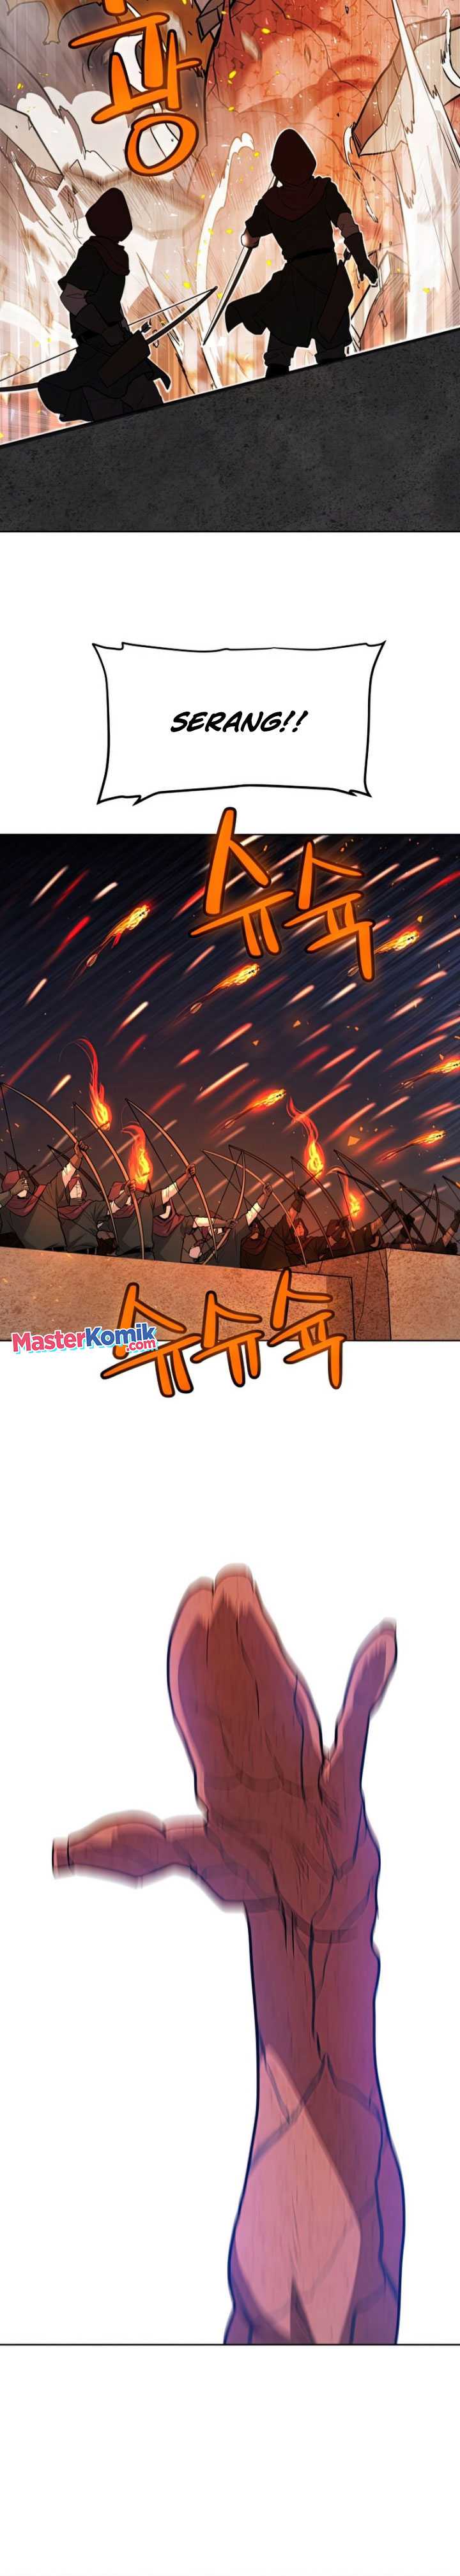 Overpowered Sword Chapter 32